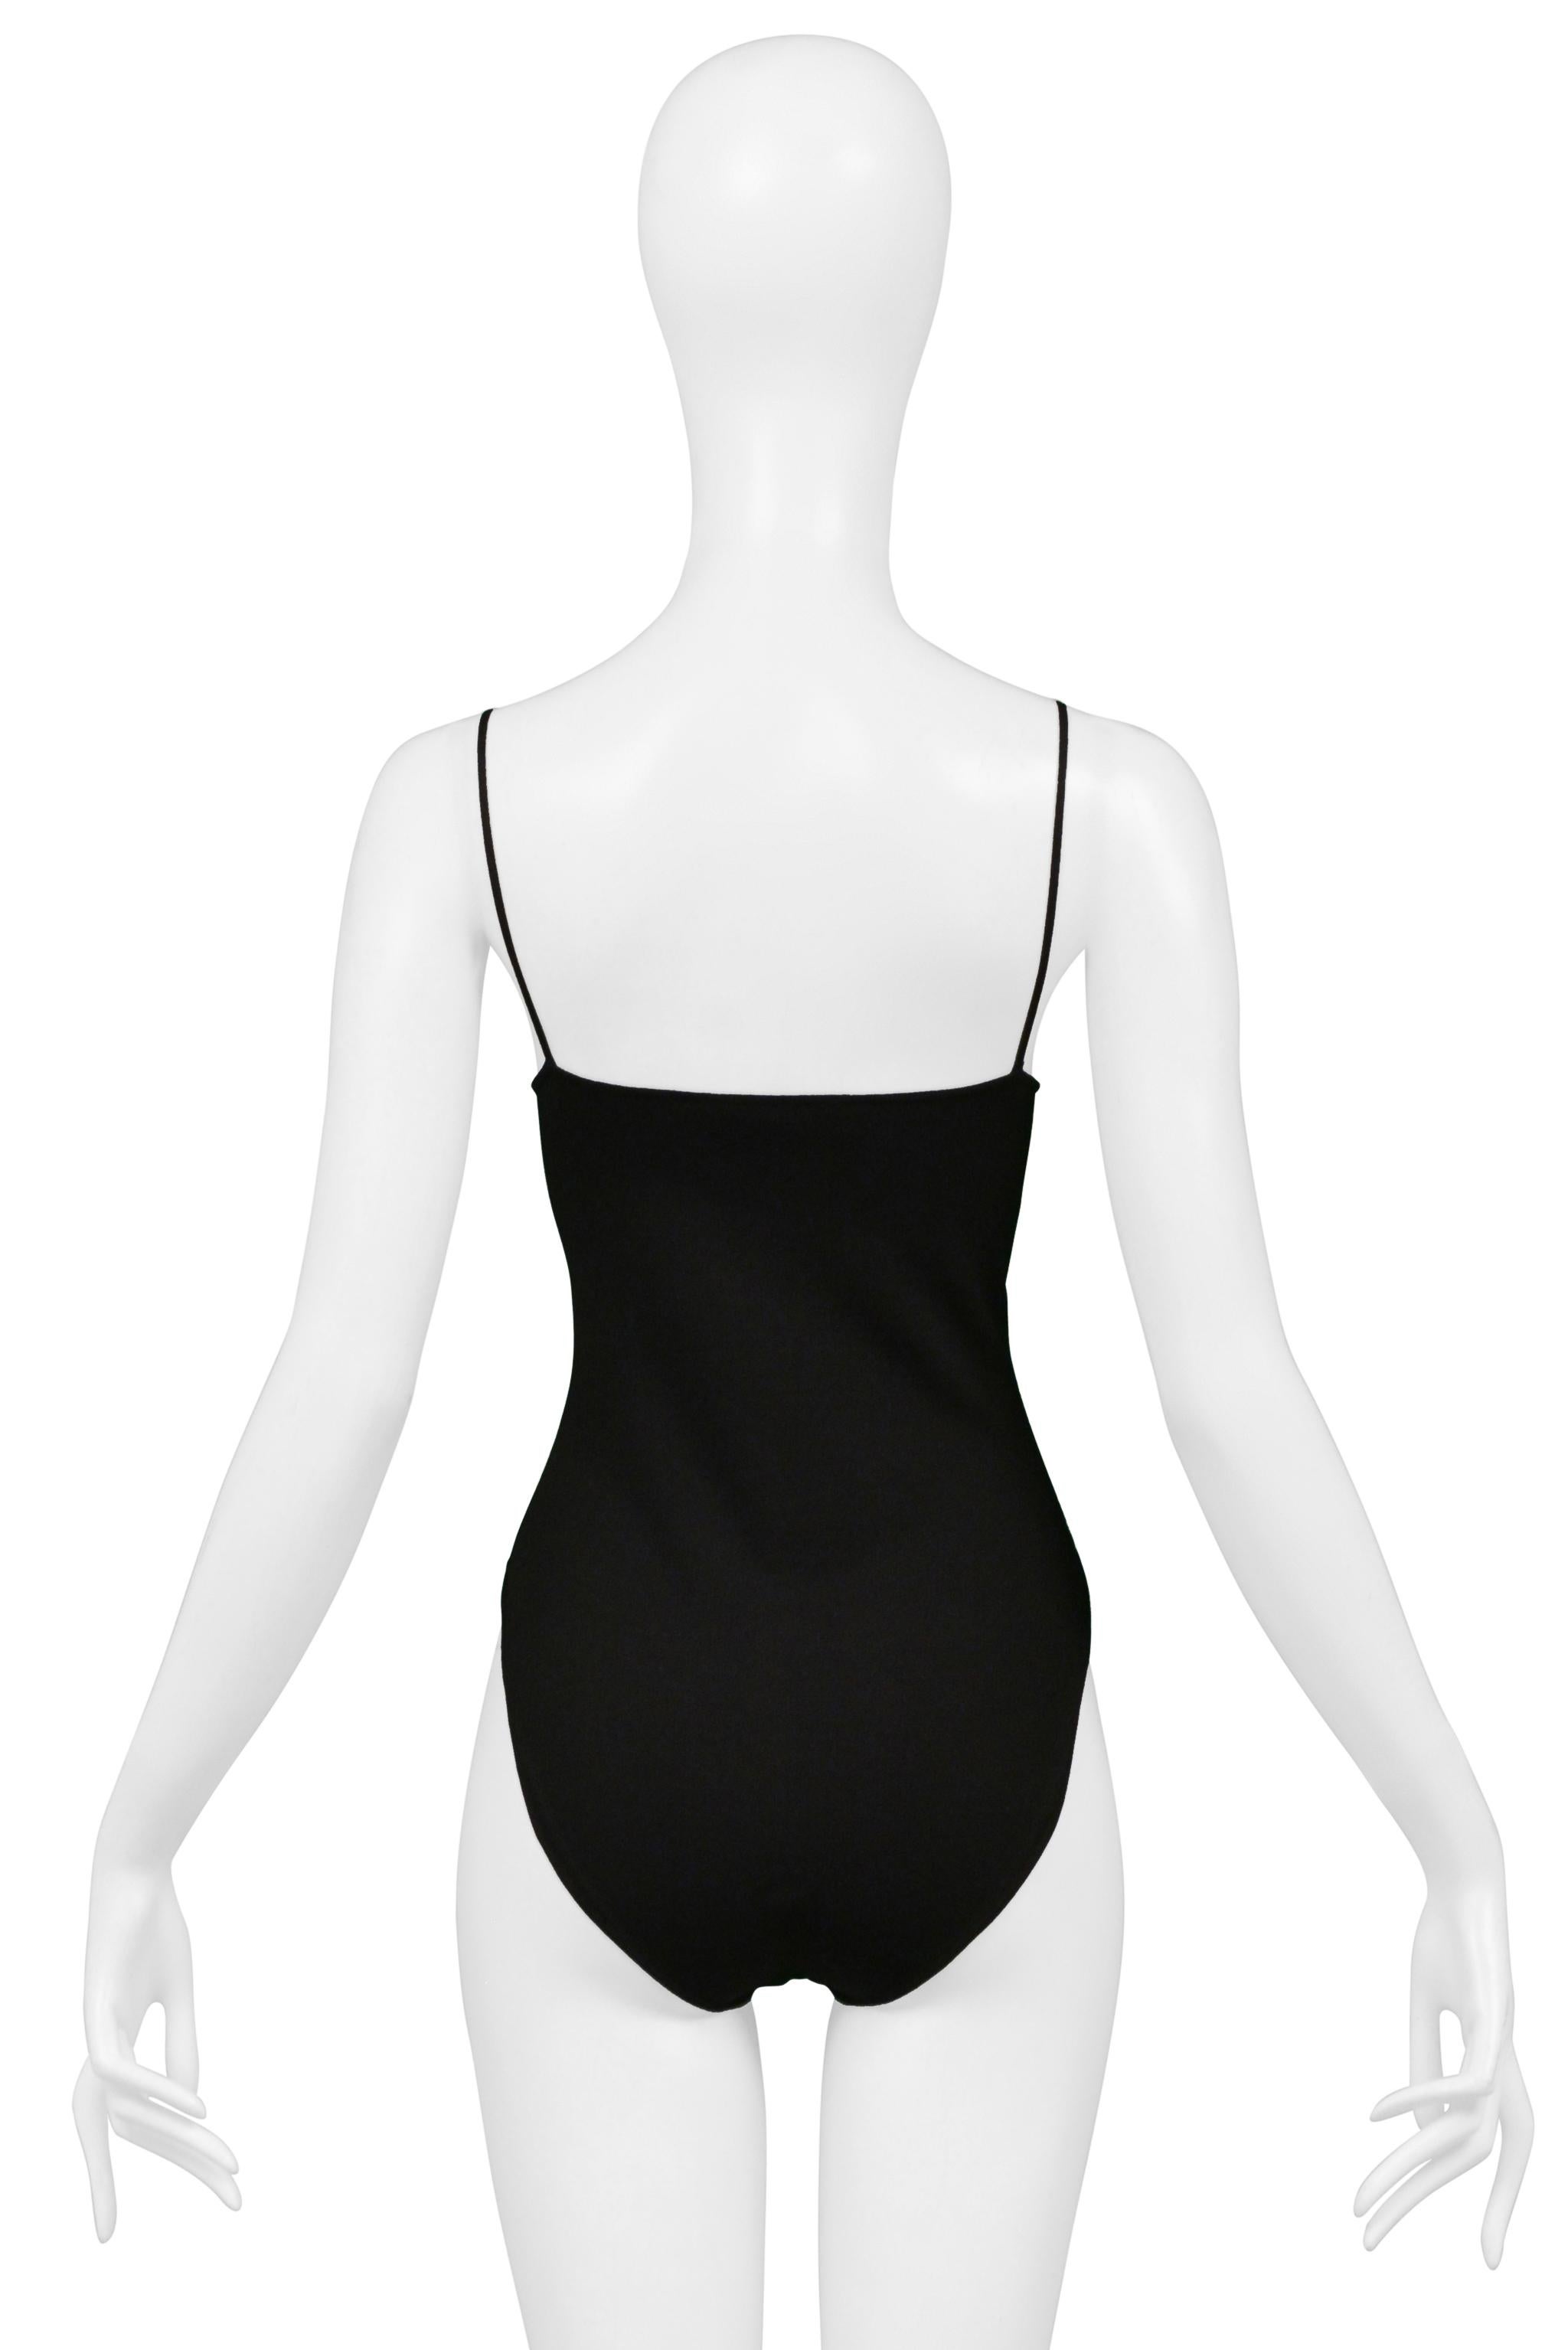 Gucci By Tom Ford Black Viscose One Piece Bodysuit 1998 For Sale 2